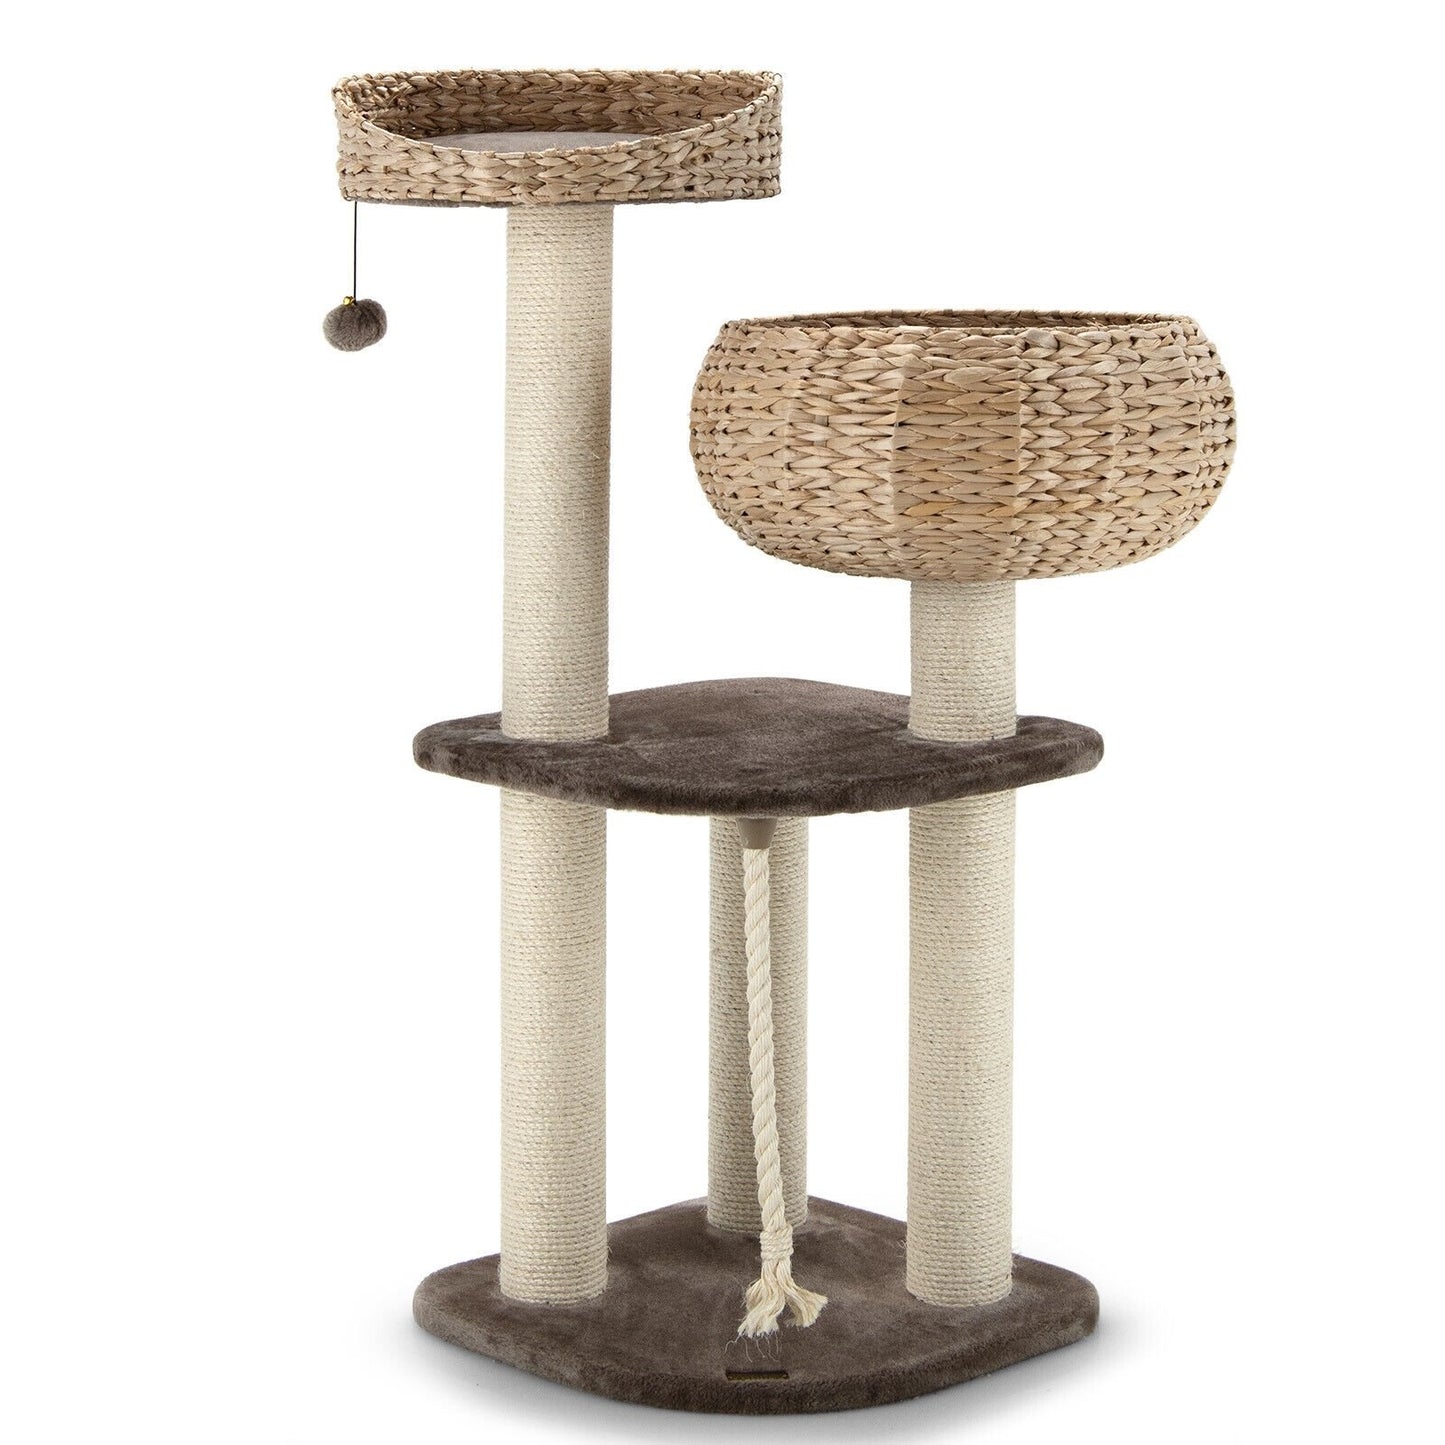 41 Inch Rattan Cat Tree with Napping Perch, Beige